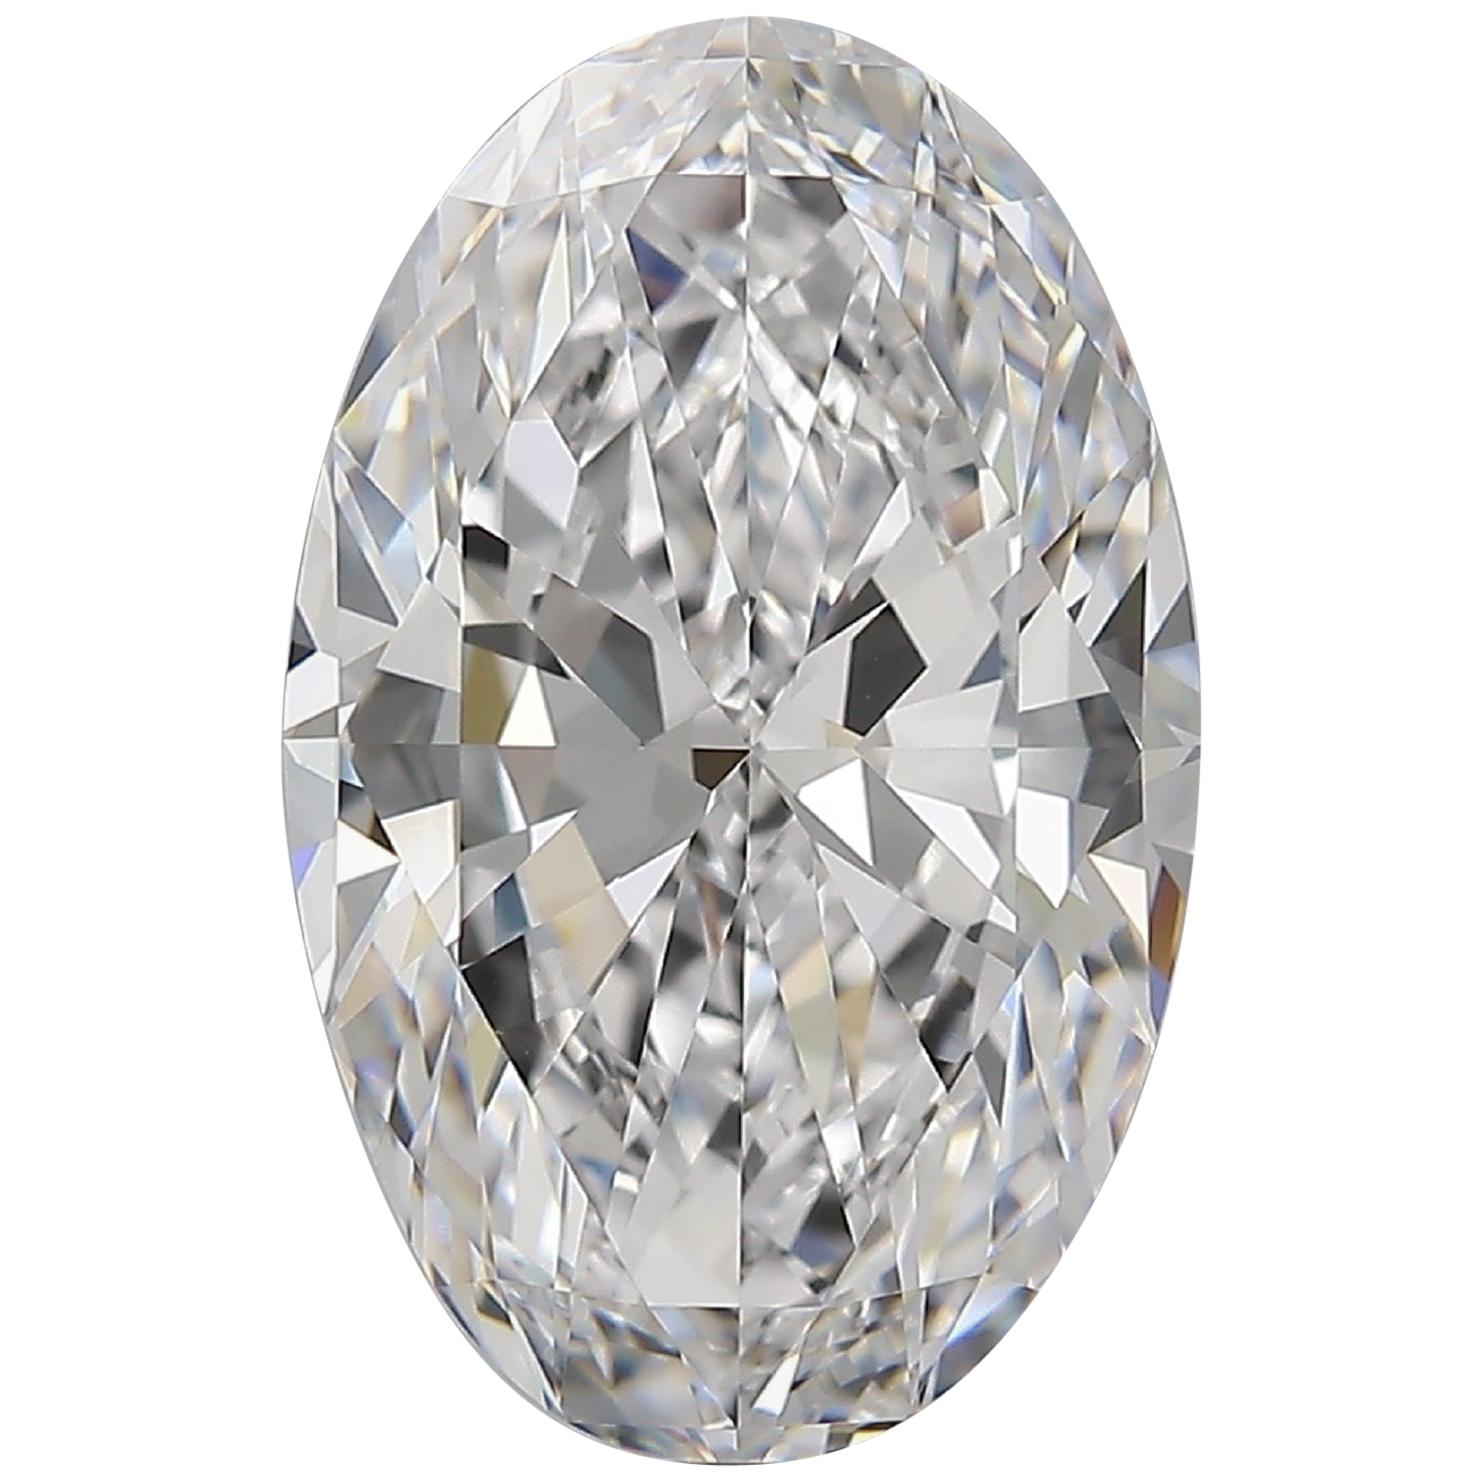 GIA Certified 5 Carat Oval Diamond Flawless D Color Excellent Cut and Polish